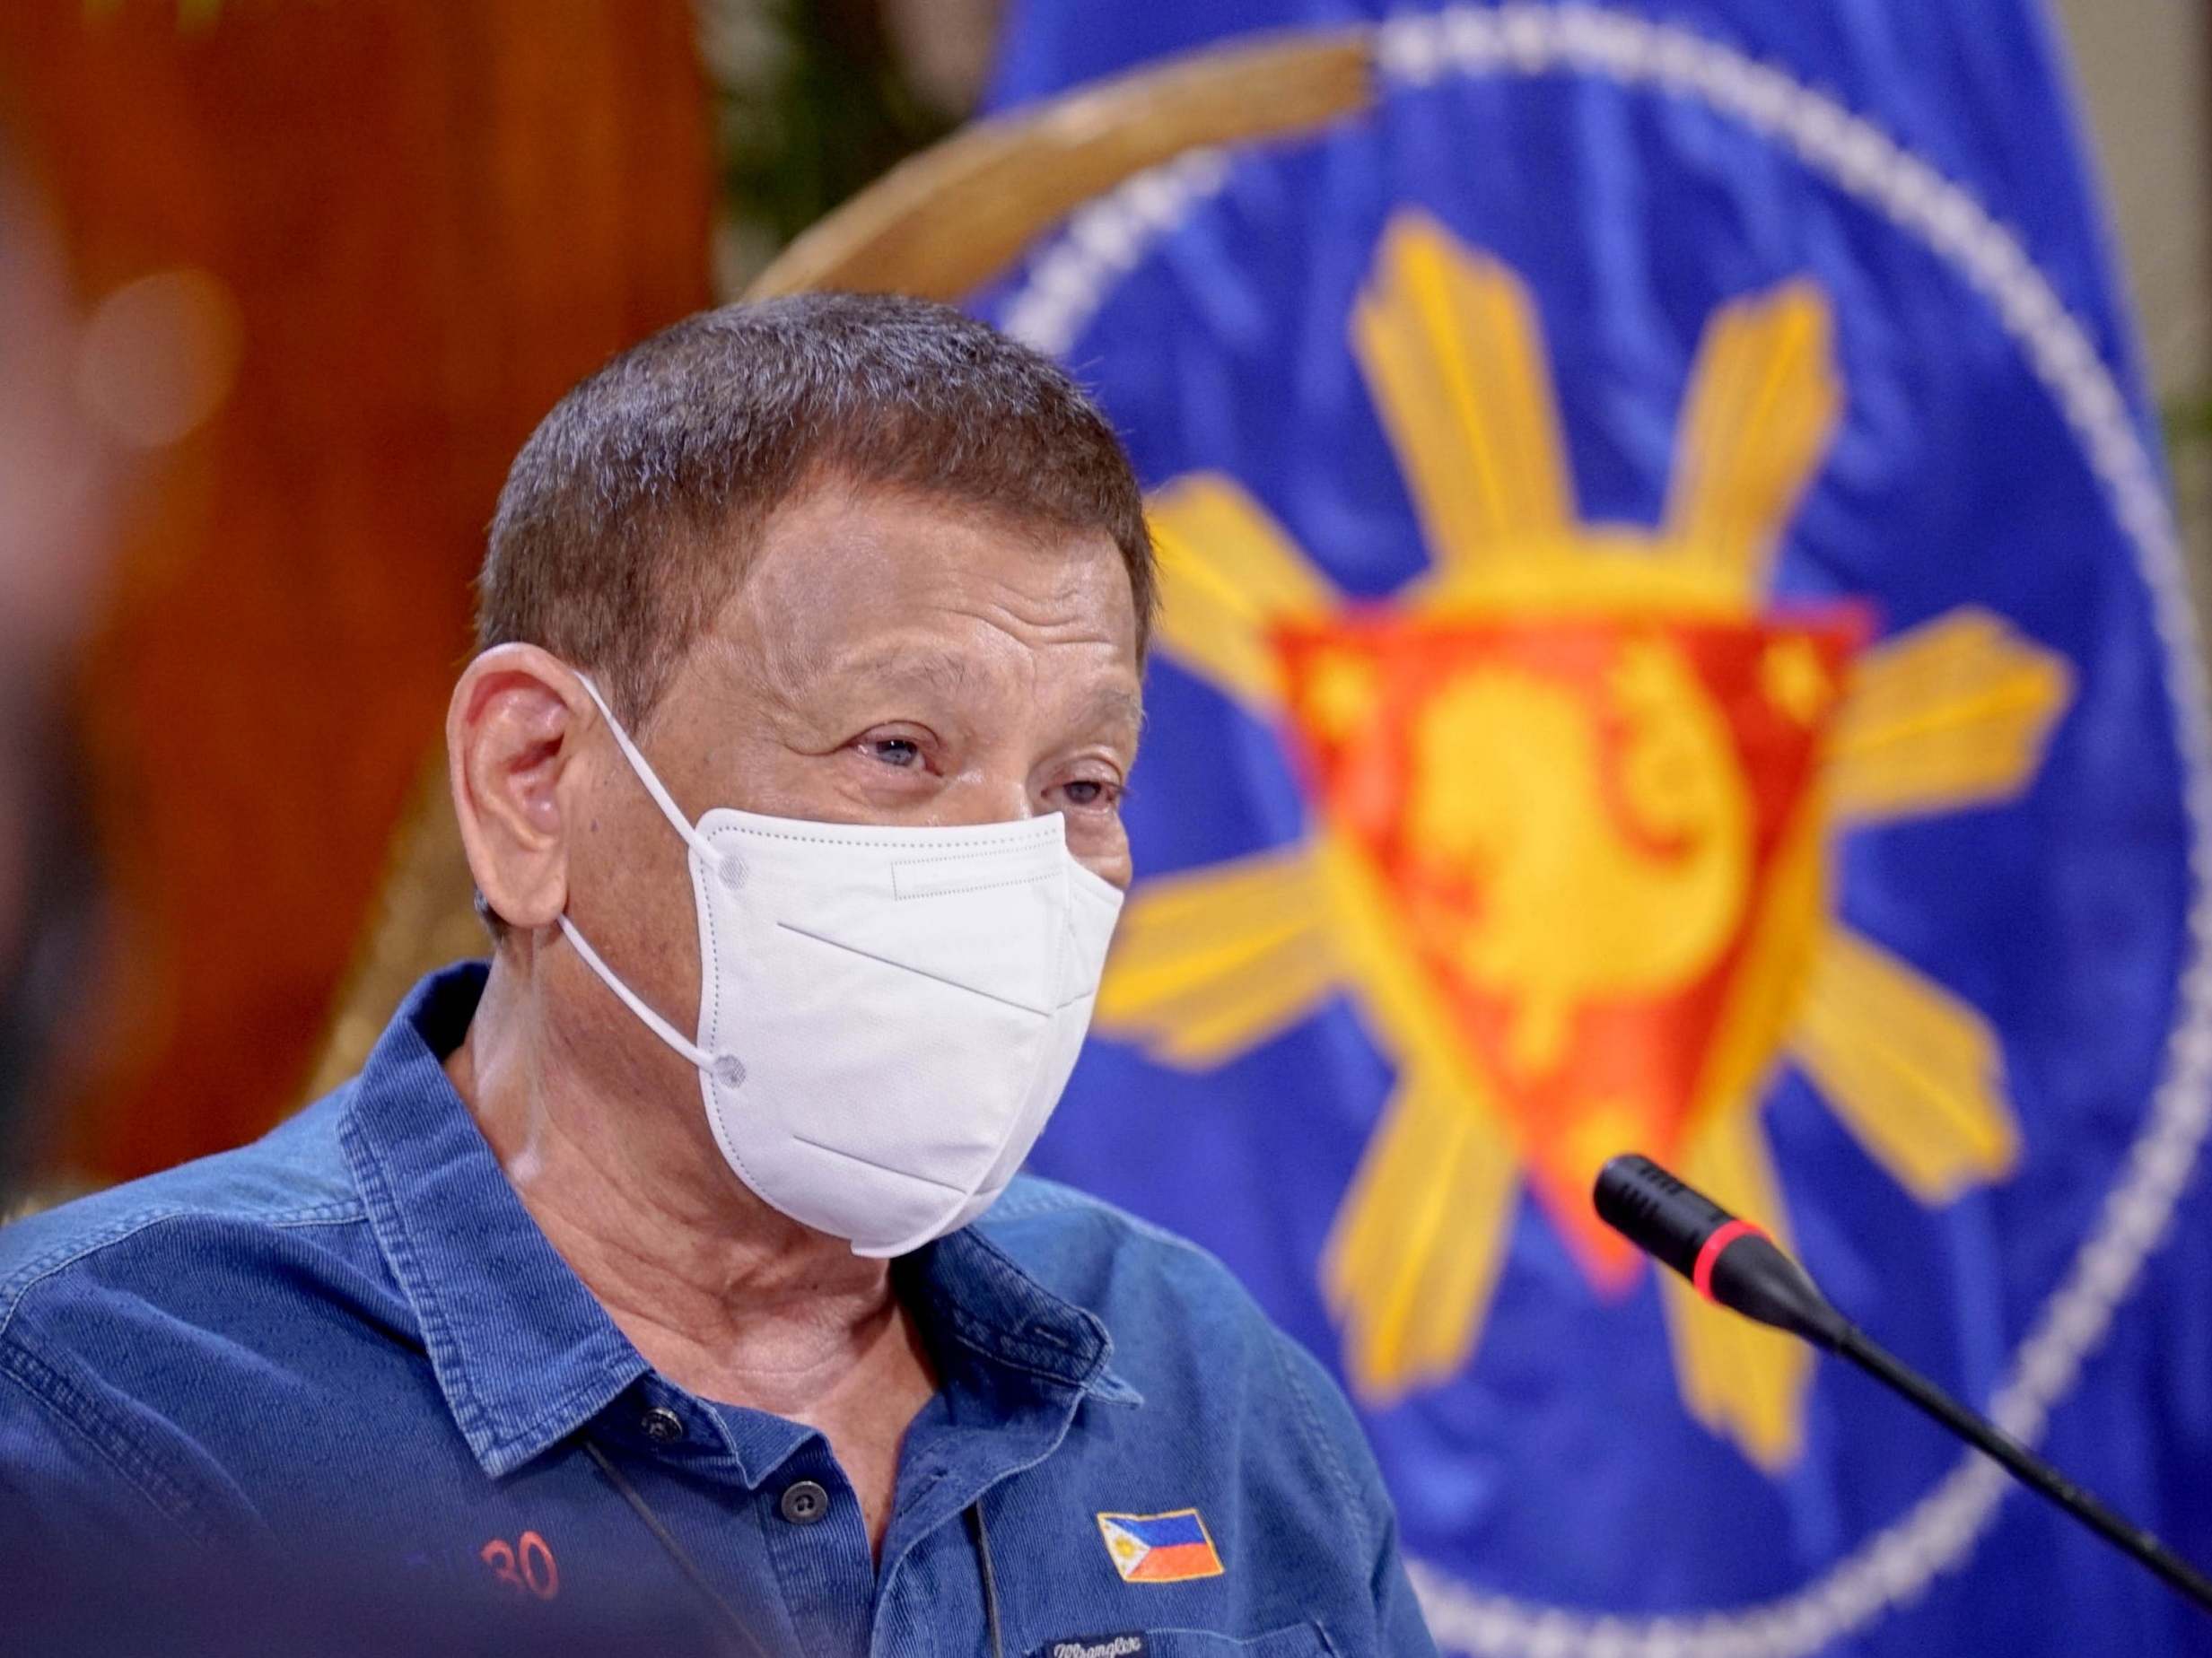 Rodrigo Duterte insisted Russia's vaccine would be 'really good for humanity'